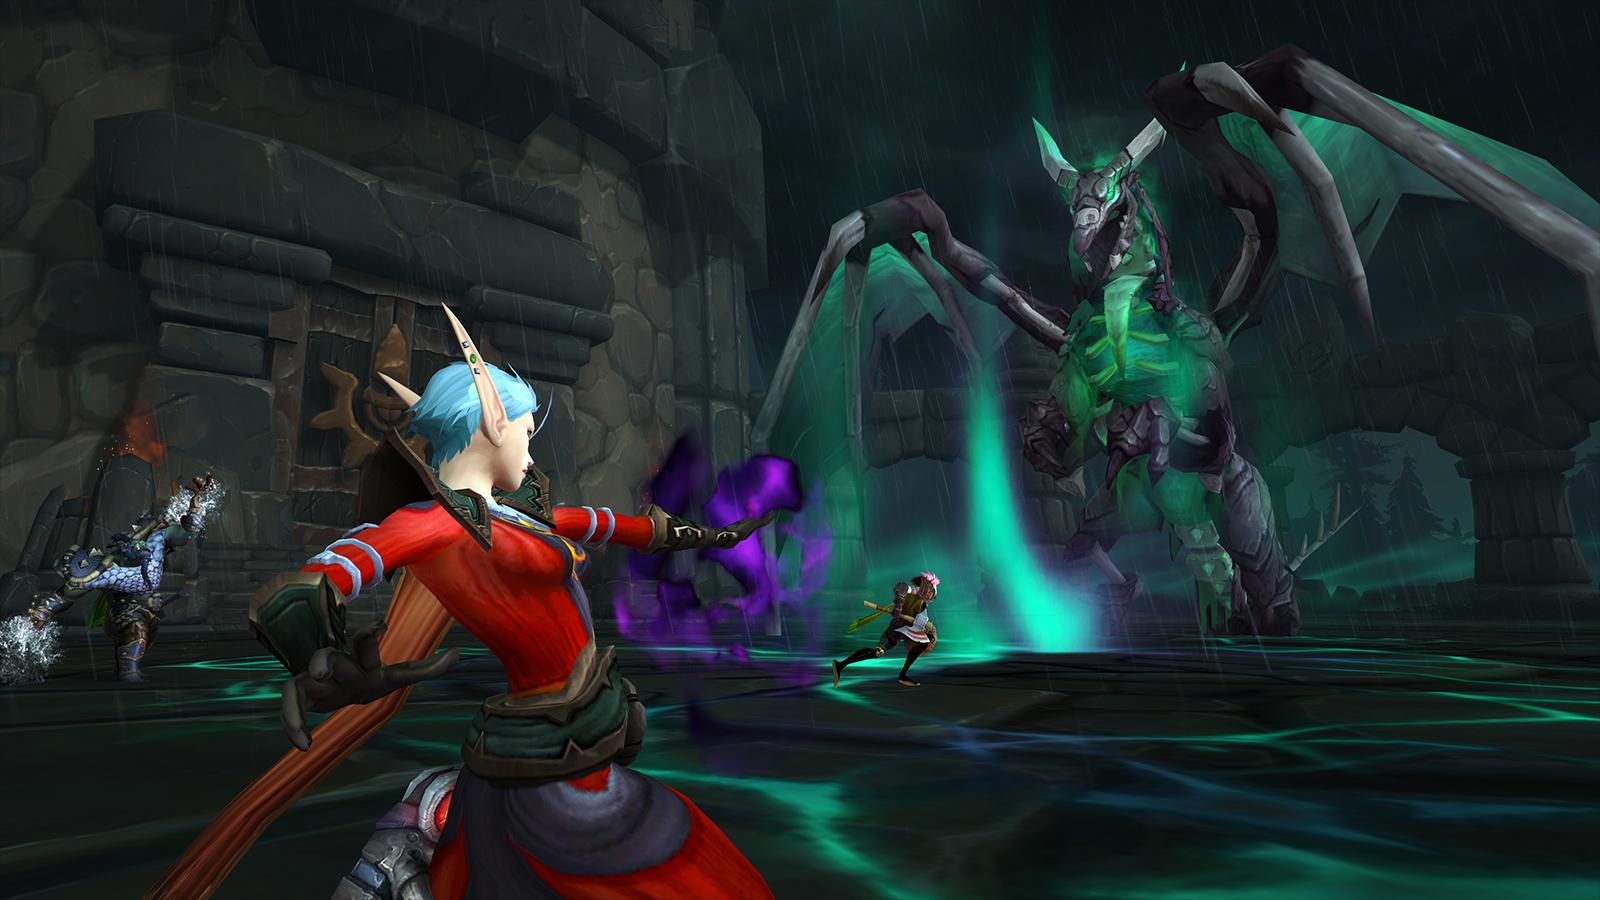 Exile's Reach photo showing a boss battle between a group of players